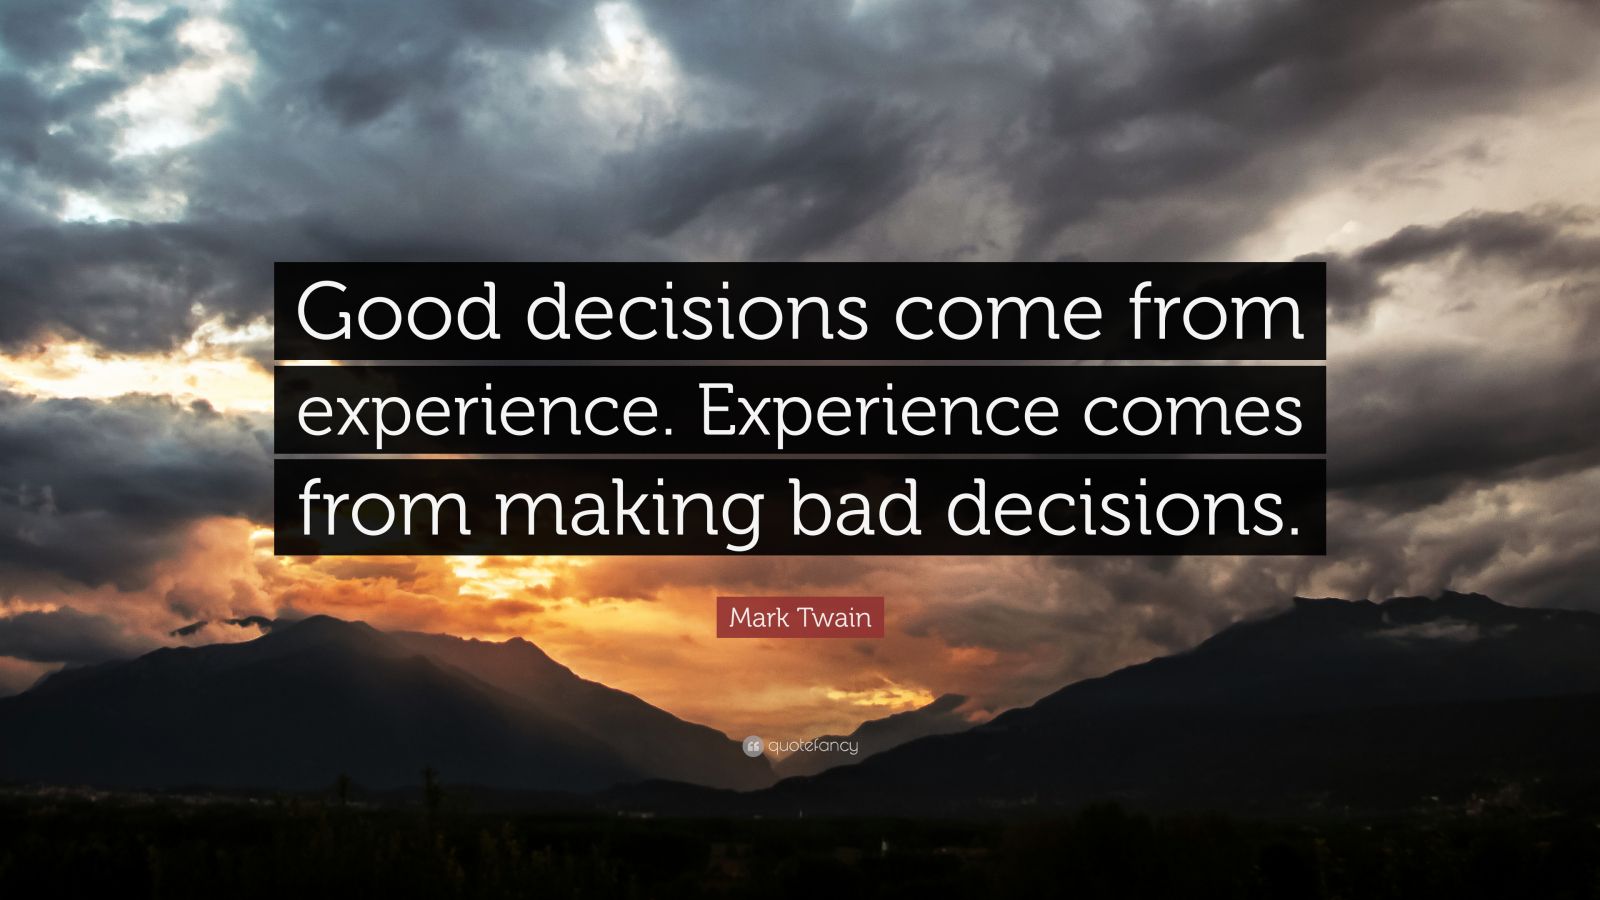 quotes about decisions shape society